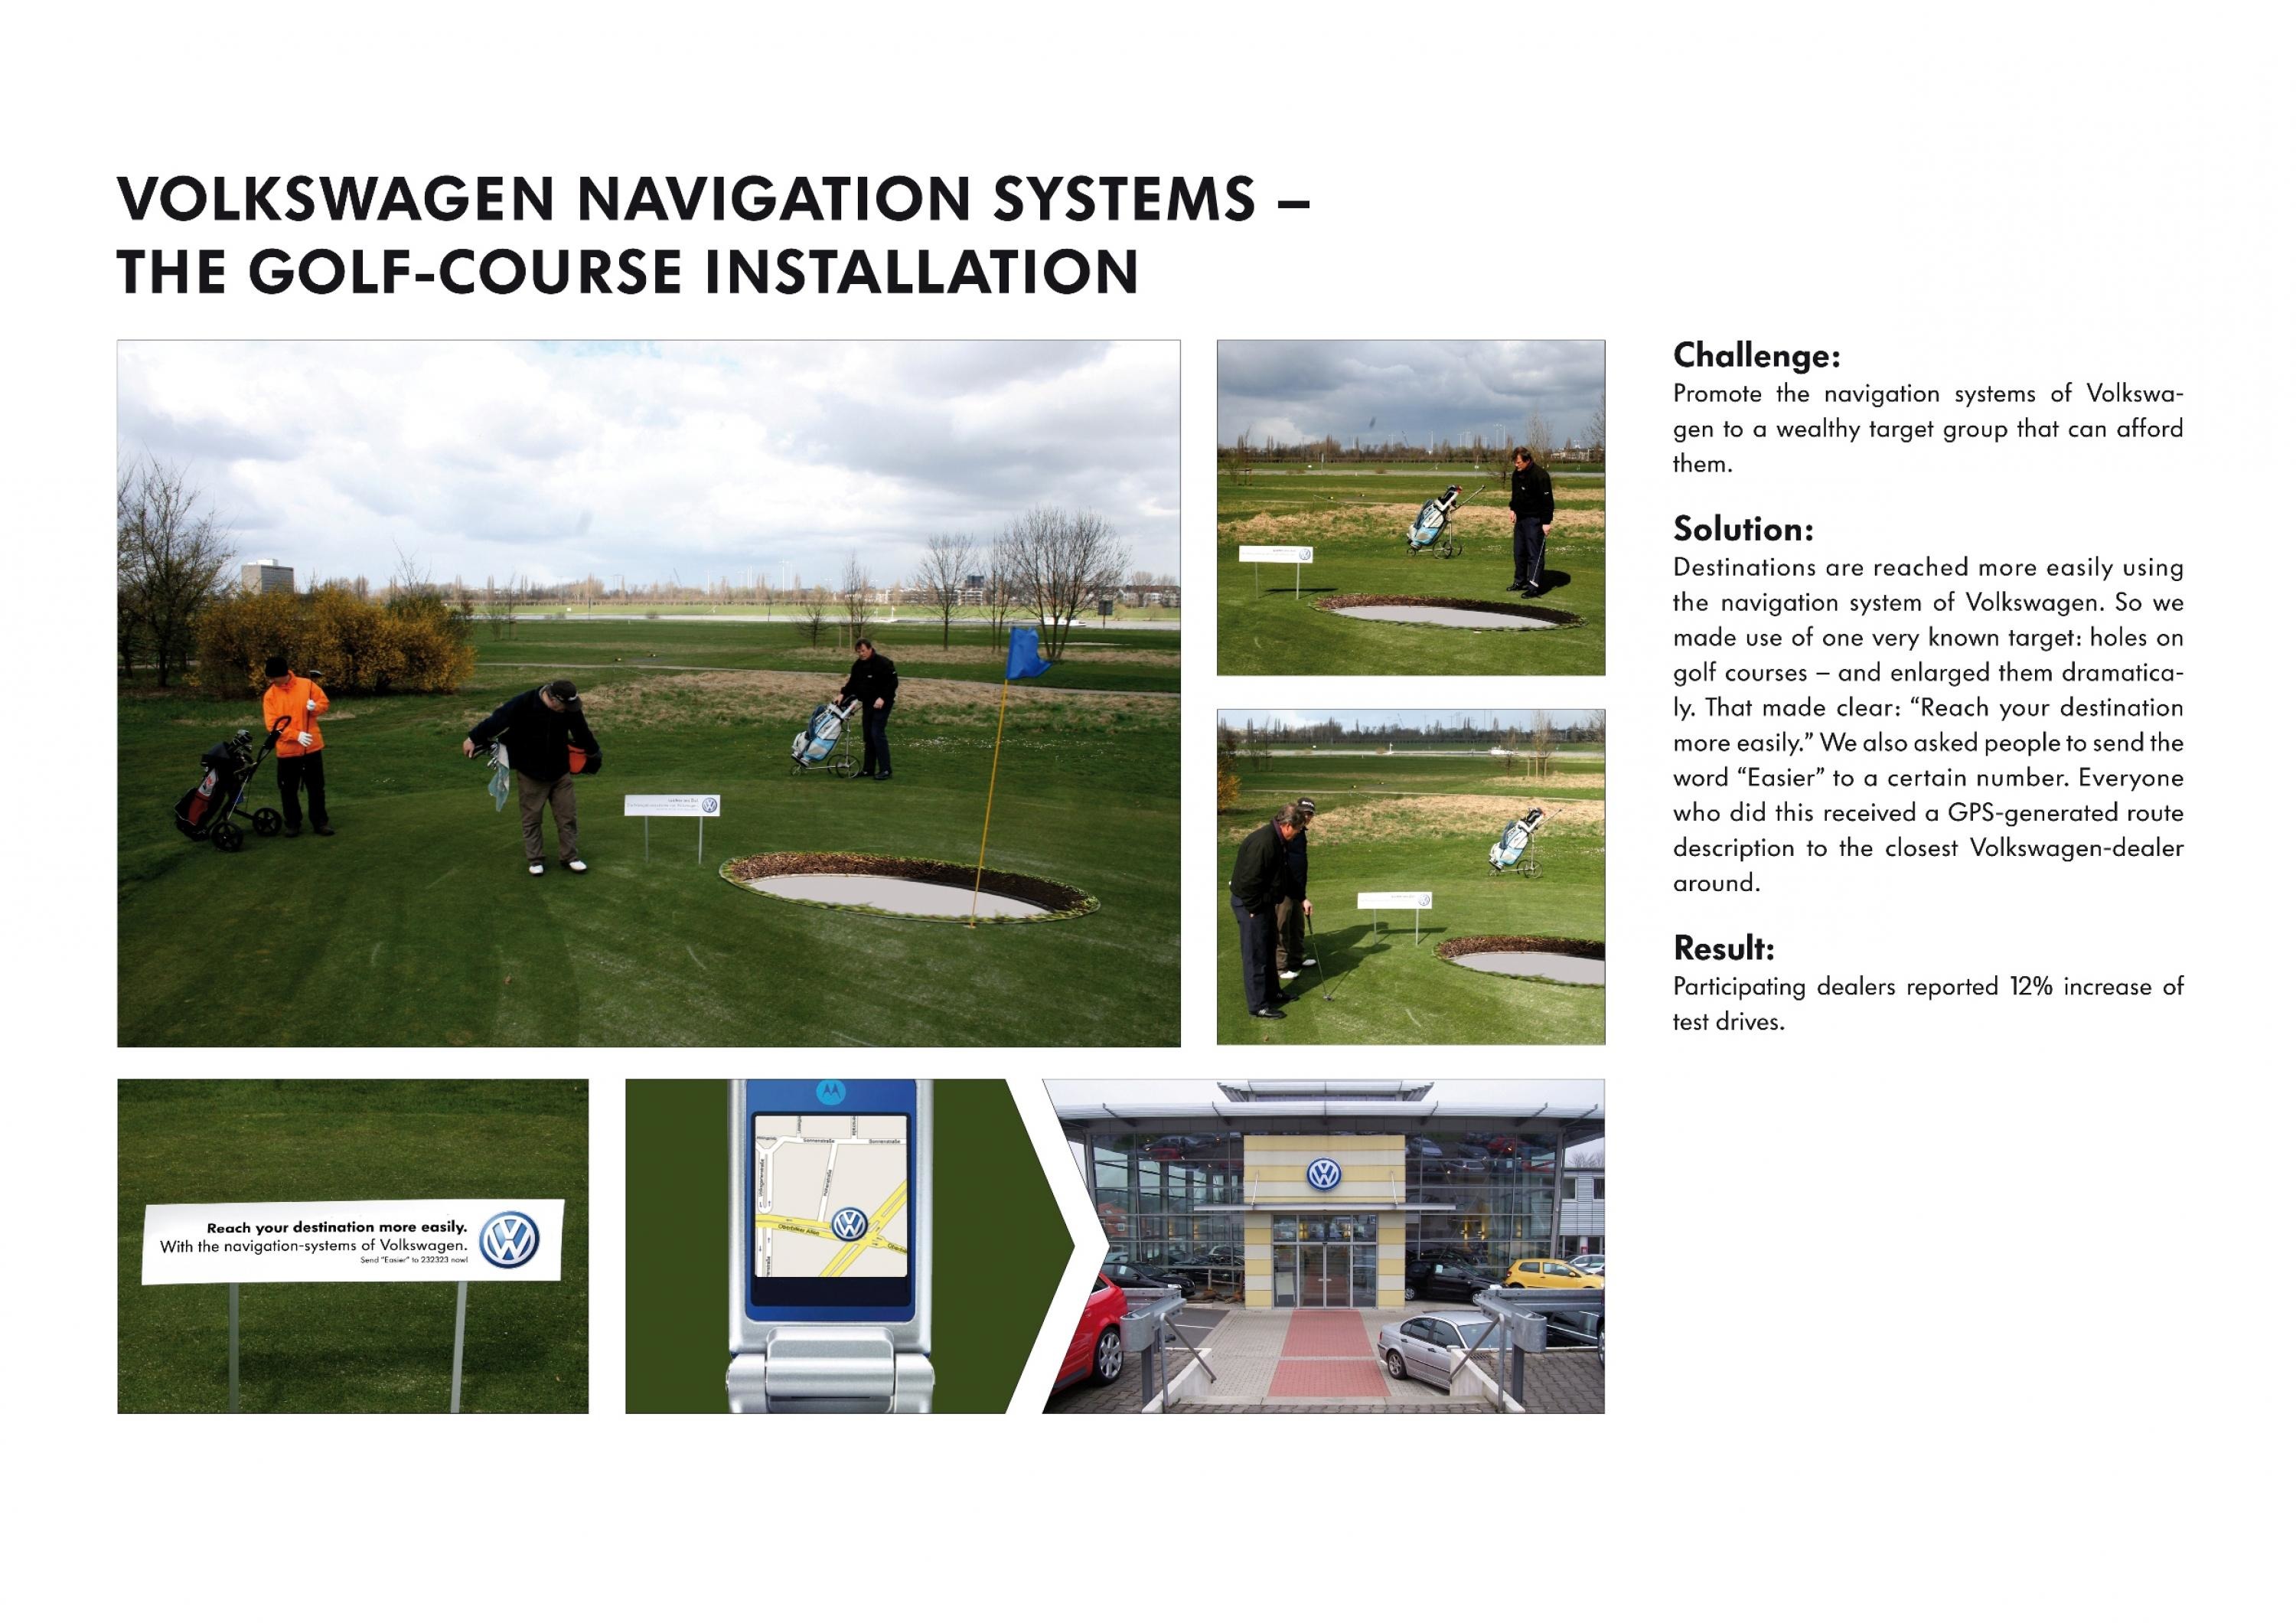 VW NAVIGATIONS SYSTEMS